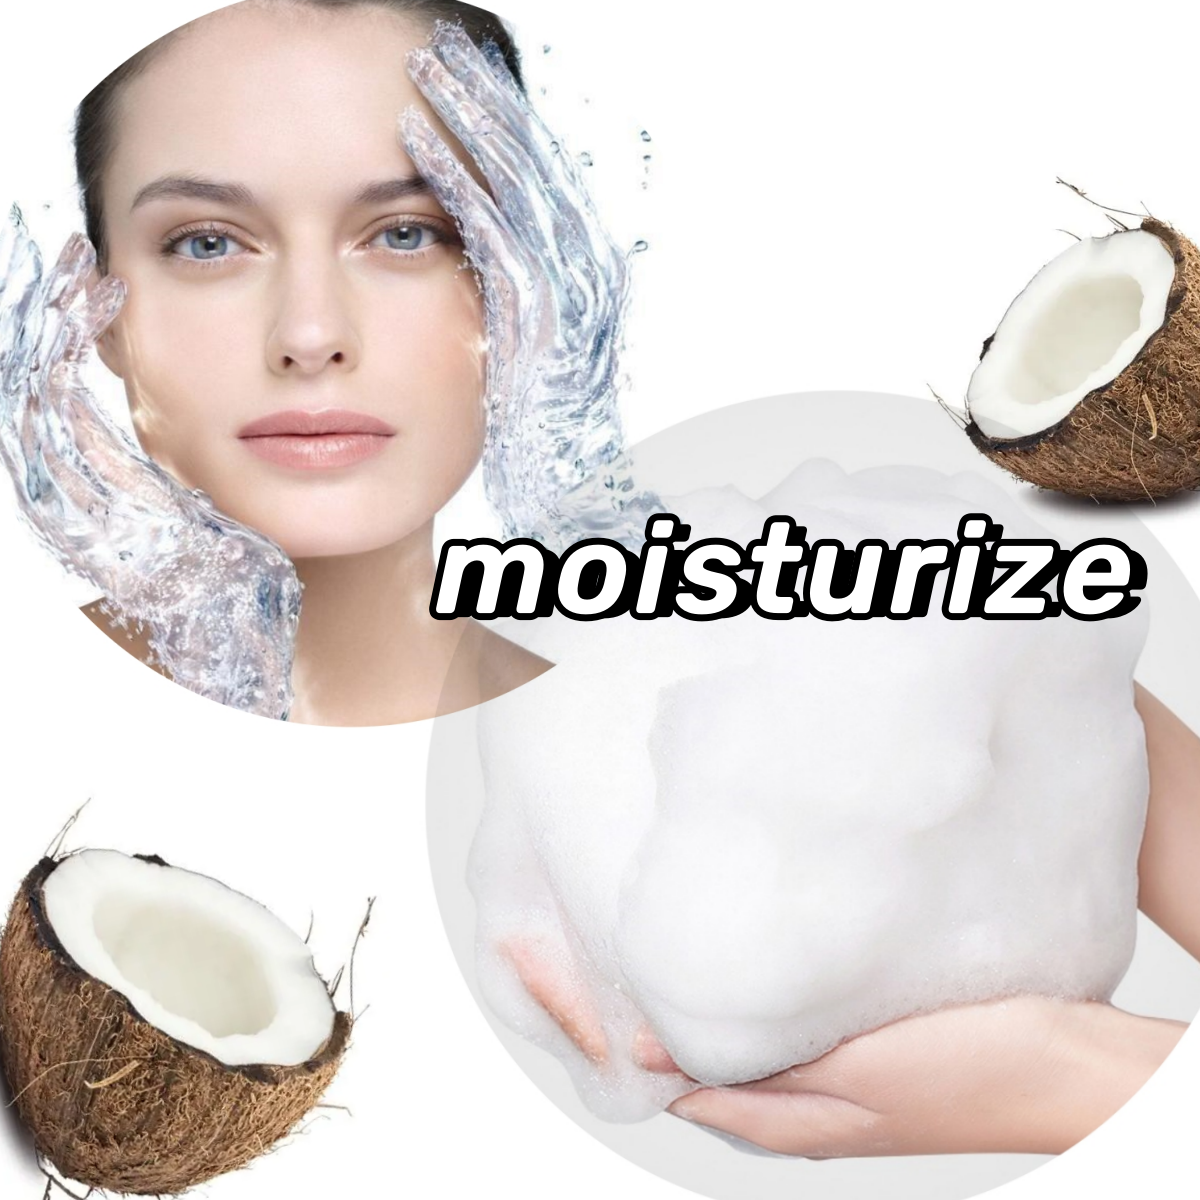 Sodium cocoyl glutamate: A Gentle and Effective Skin Surfactant